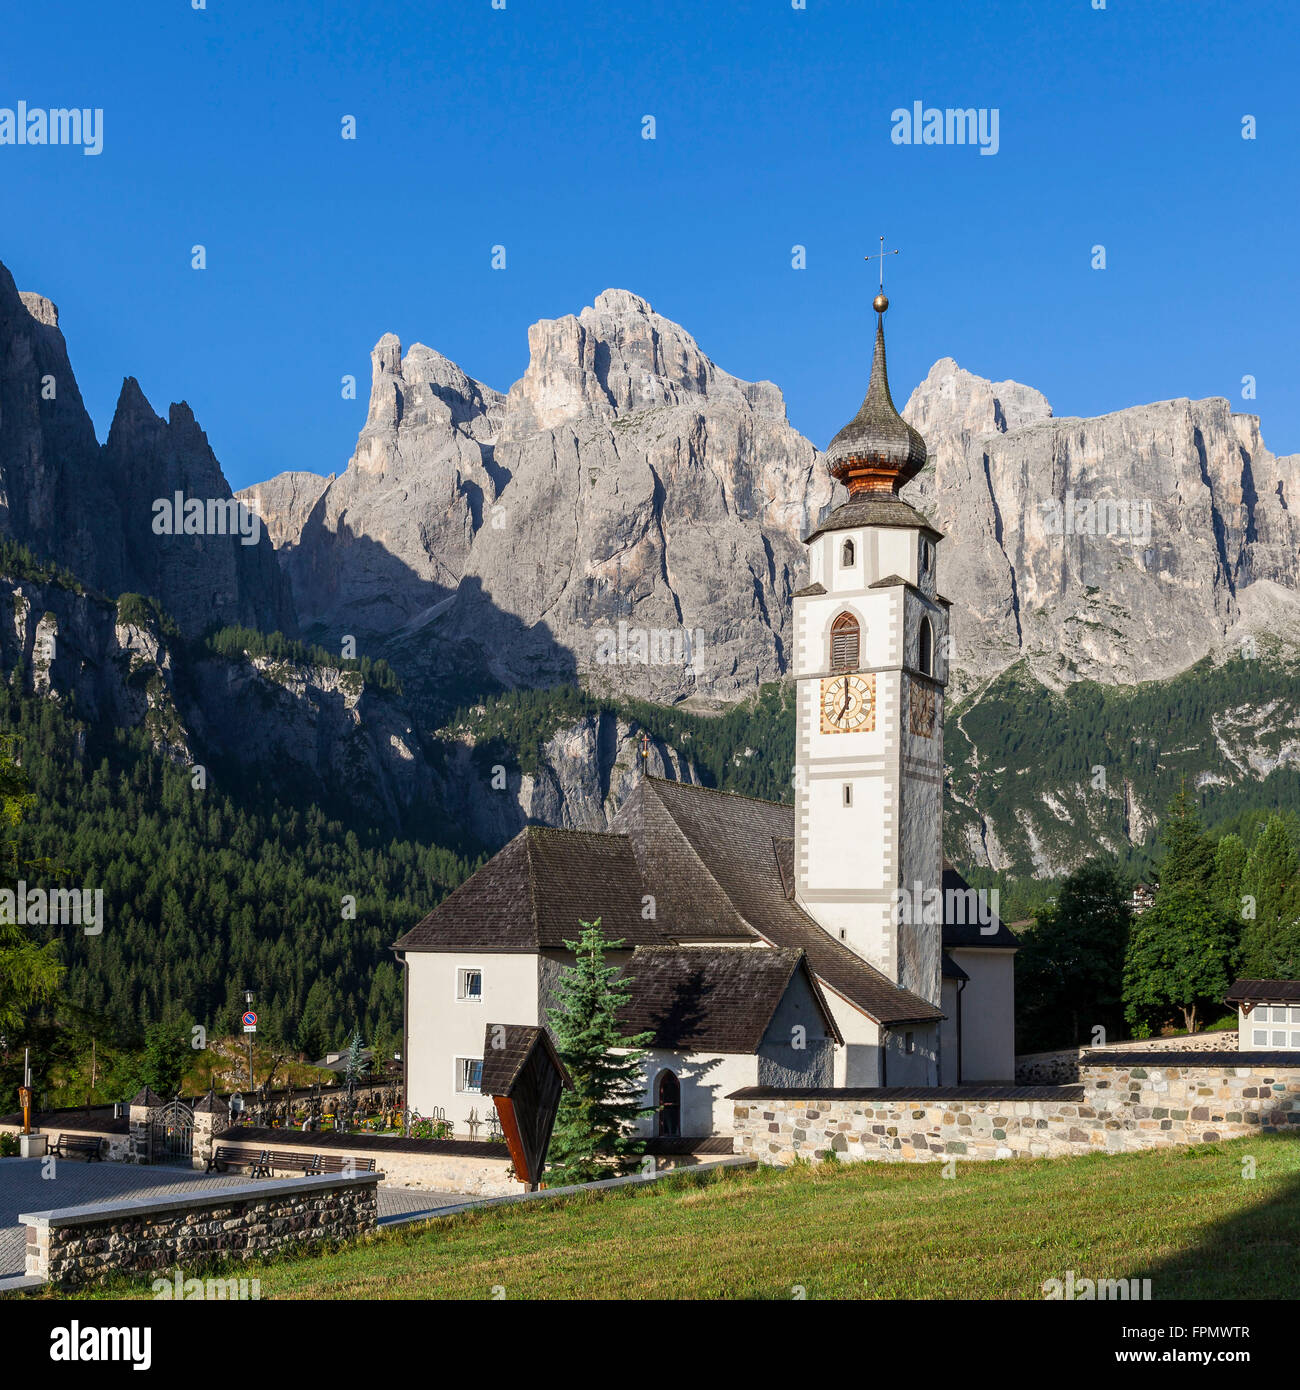 Church in Kolfuschg, Sella in background, Dolomites, South Tyrol, Italy, Europe, Stock Photo